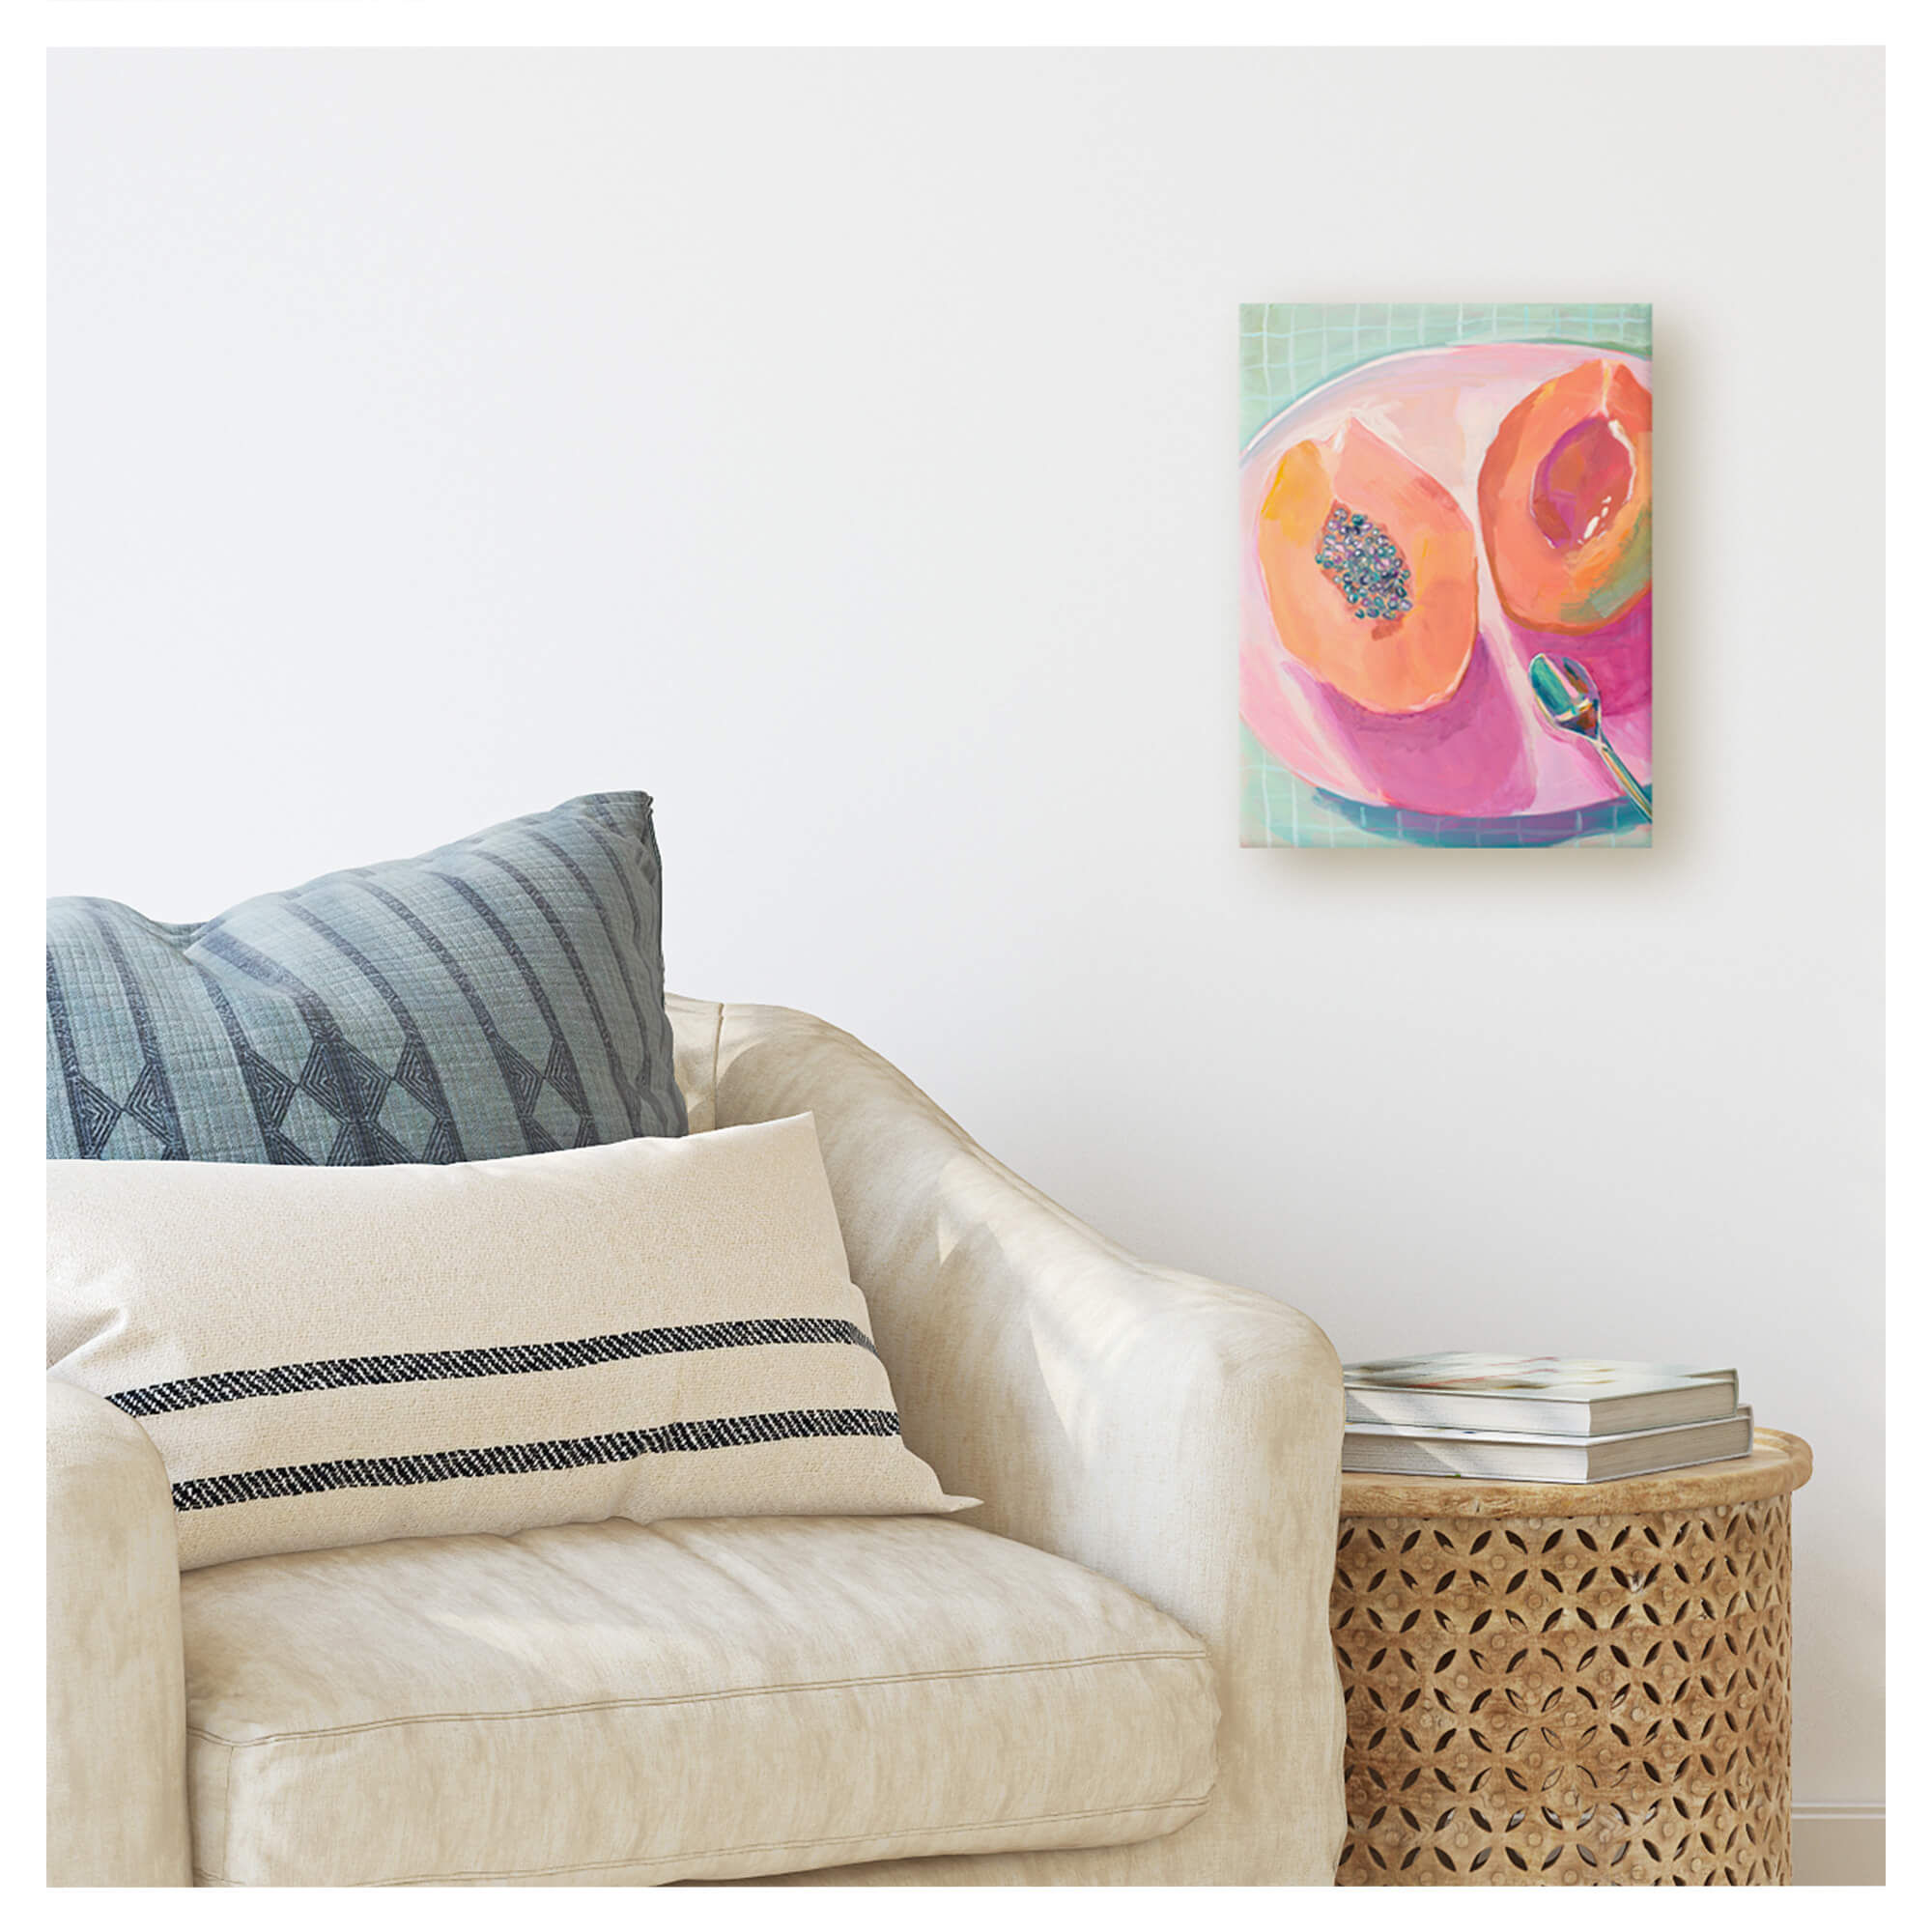 A vibrant painting on a canvas depicting a papaya fruit by Hawaii artist Lindsay Wilkins